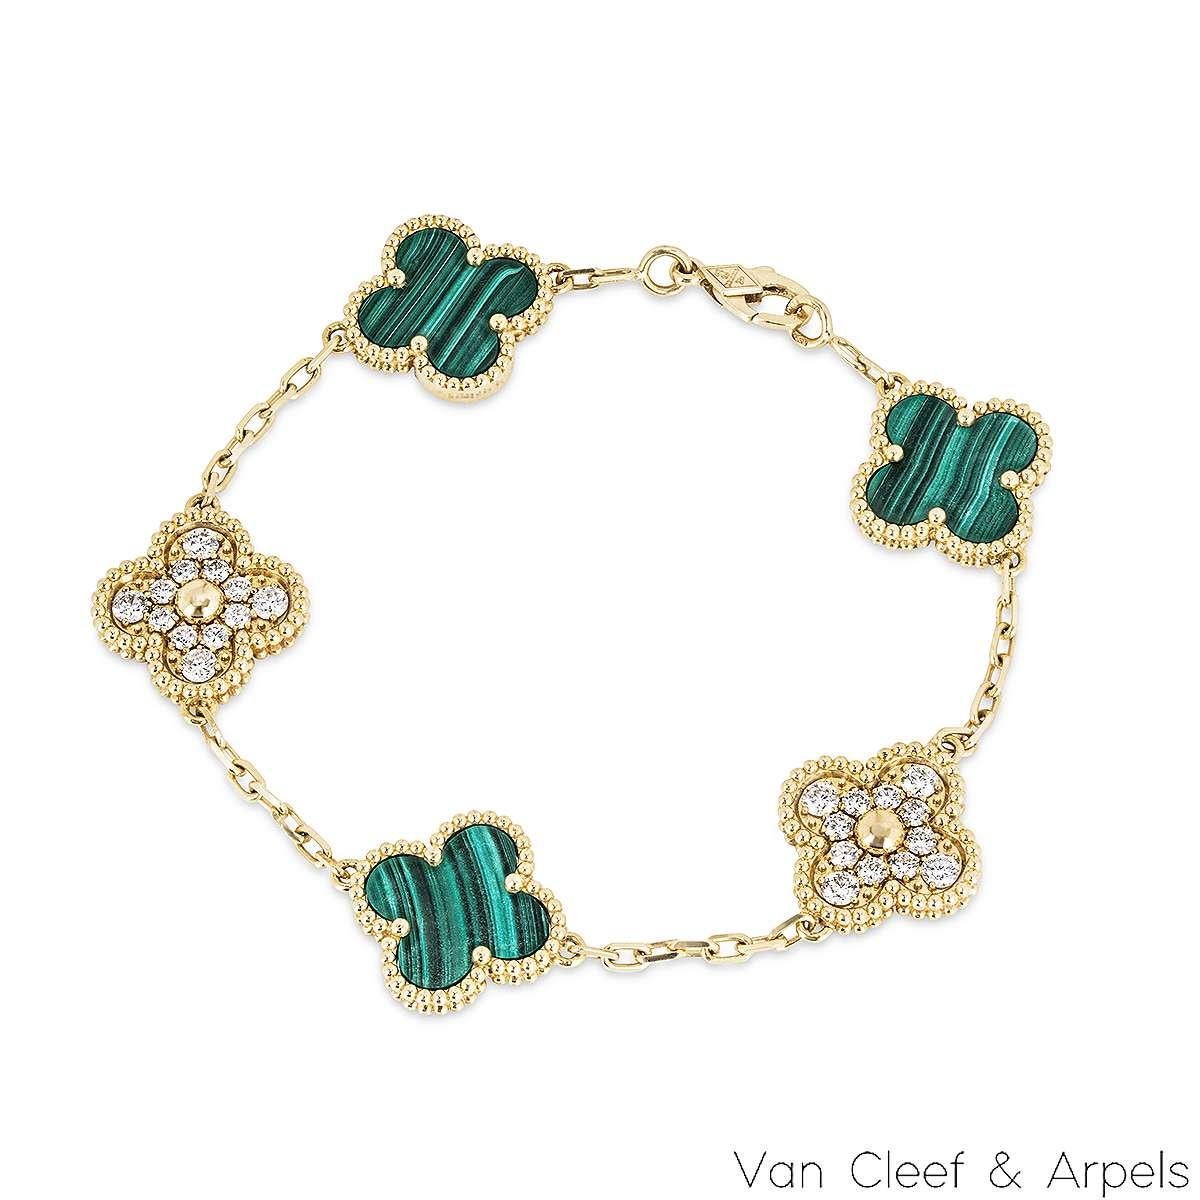 A stunning 18k yellow gold bracelet from the Vintage Alhambra collection by Van Cleef and Arpels. The bracelet is made up of 5 of the iconic clover motifs, three are set with malachite inlays and two are each set with 12 round brilliant cut diamonds